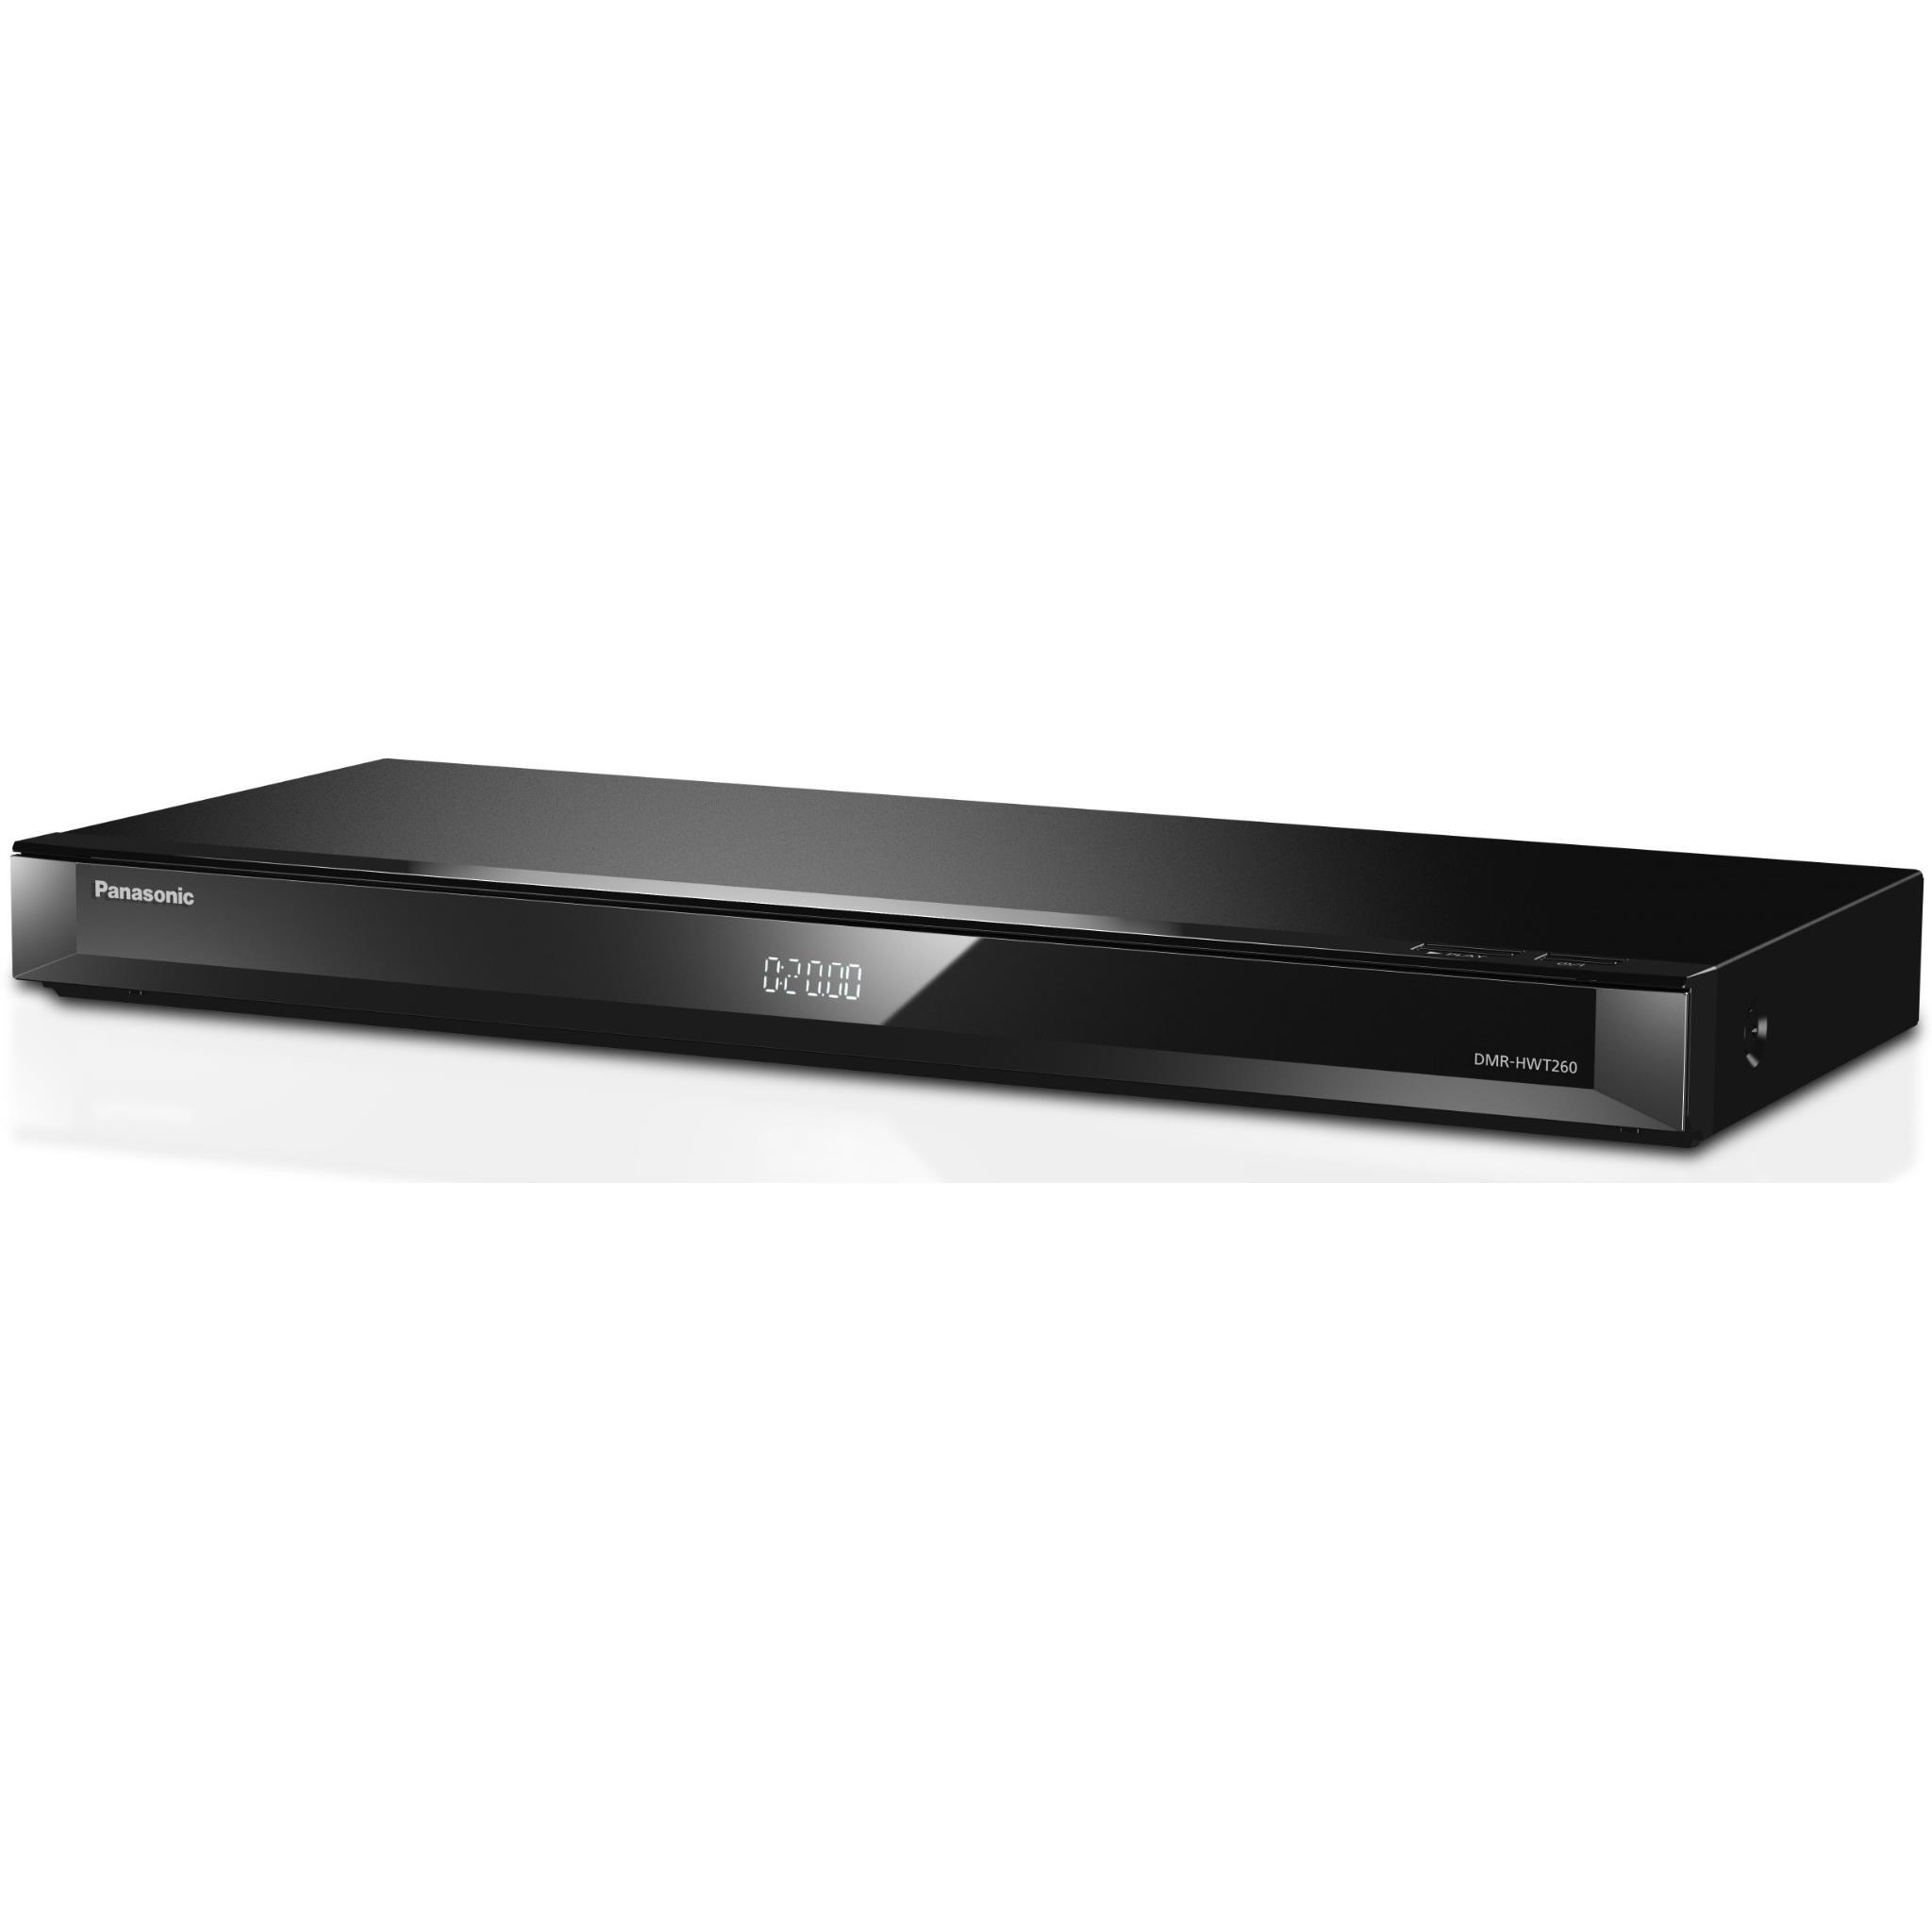 Image of Panasonic 1TB HDD Smart PVR with Twin HD Tuners